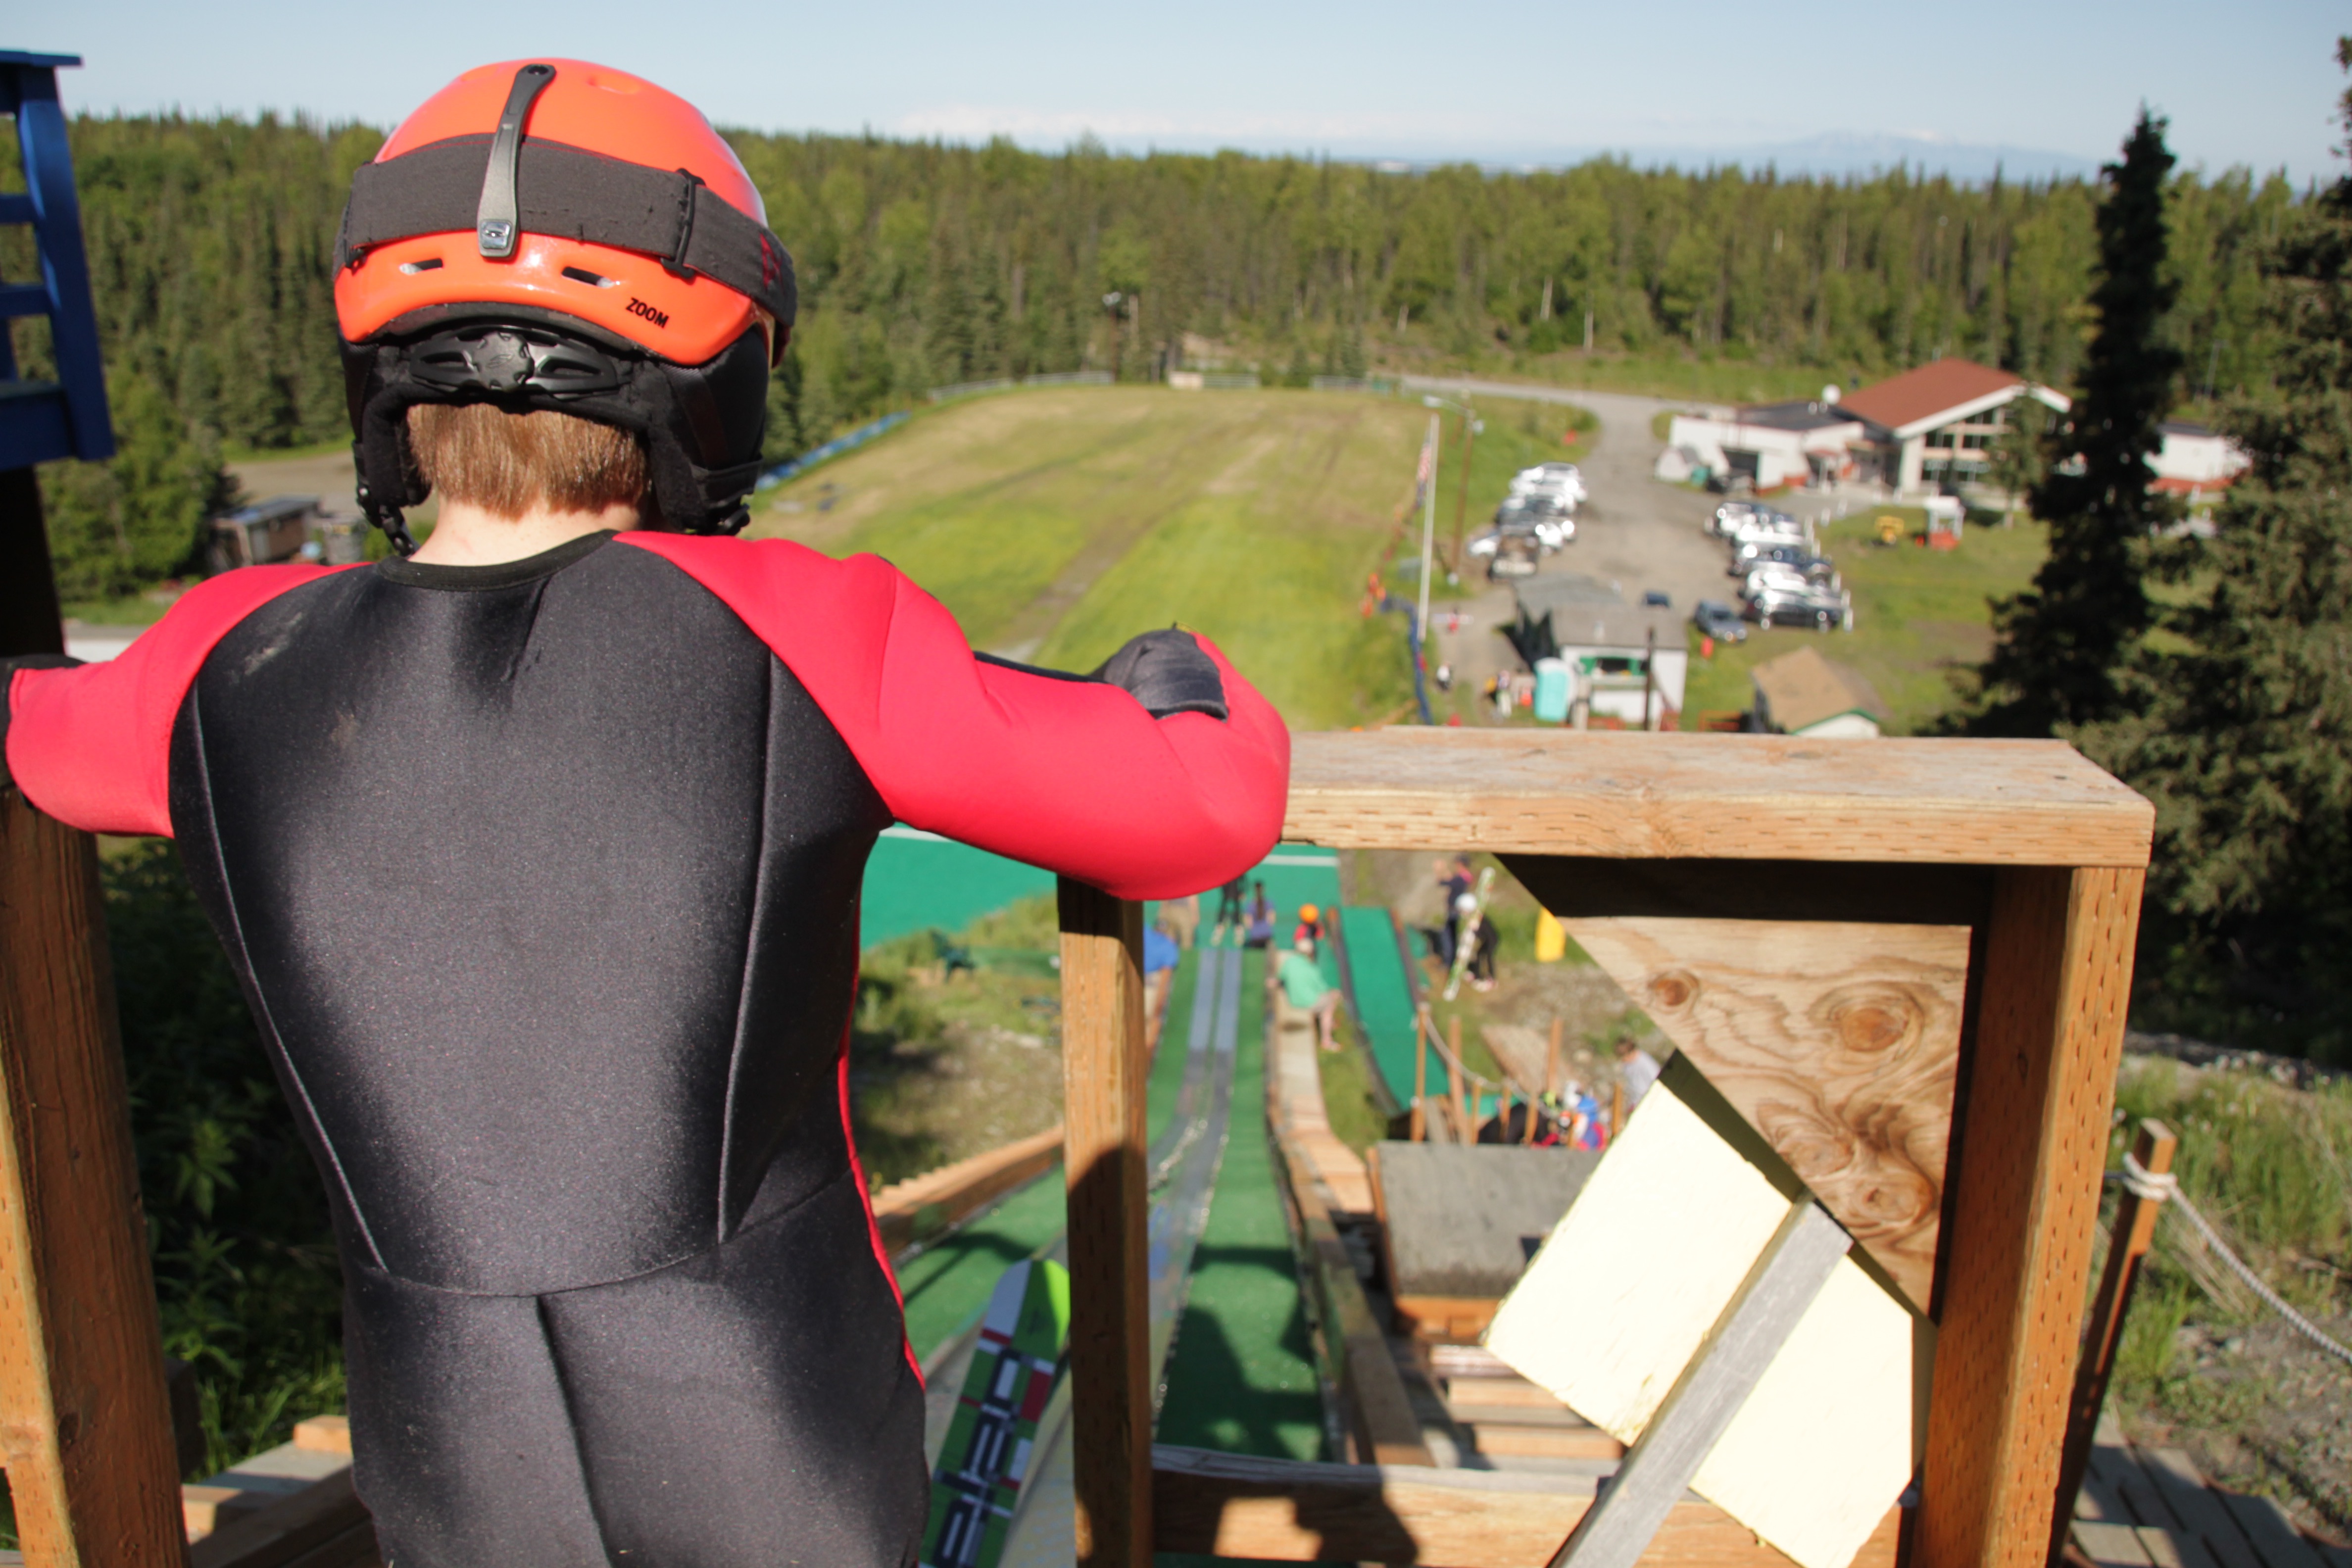 One of the skiers looks out at the ski jump facility from the top of the 40-meter hill. (Photo by Ammon Swenson, Alaska Public Media - Anchorage)